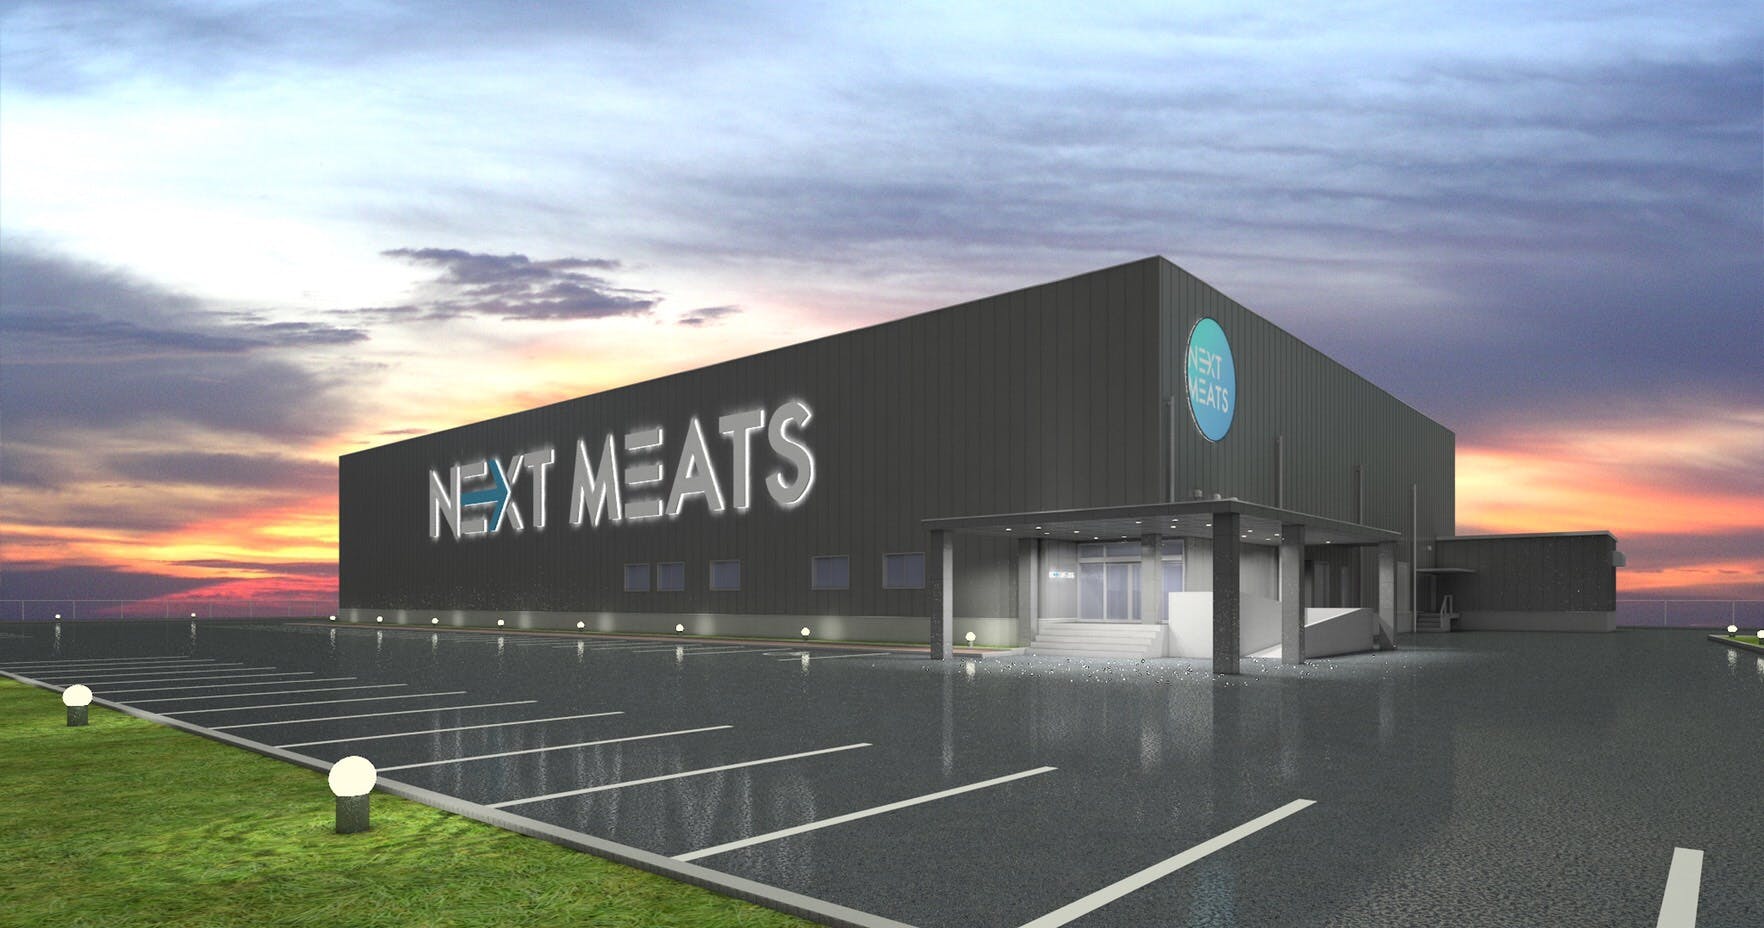 Japanese Alternative meat venture Next Meats will be constructing its own eco-friendly factory, dedicated to alternative protein products